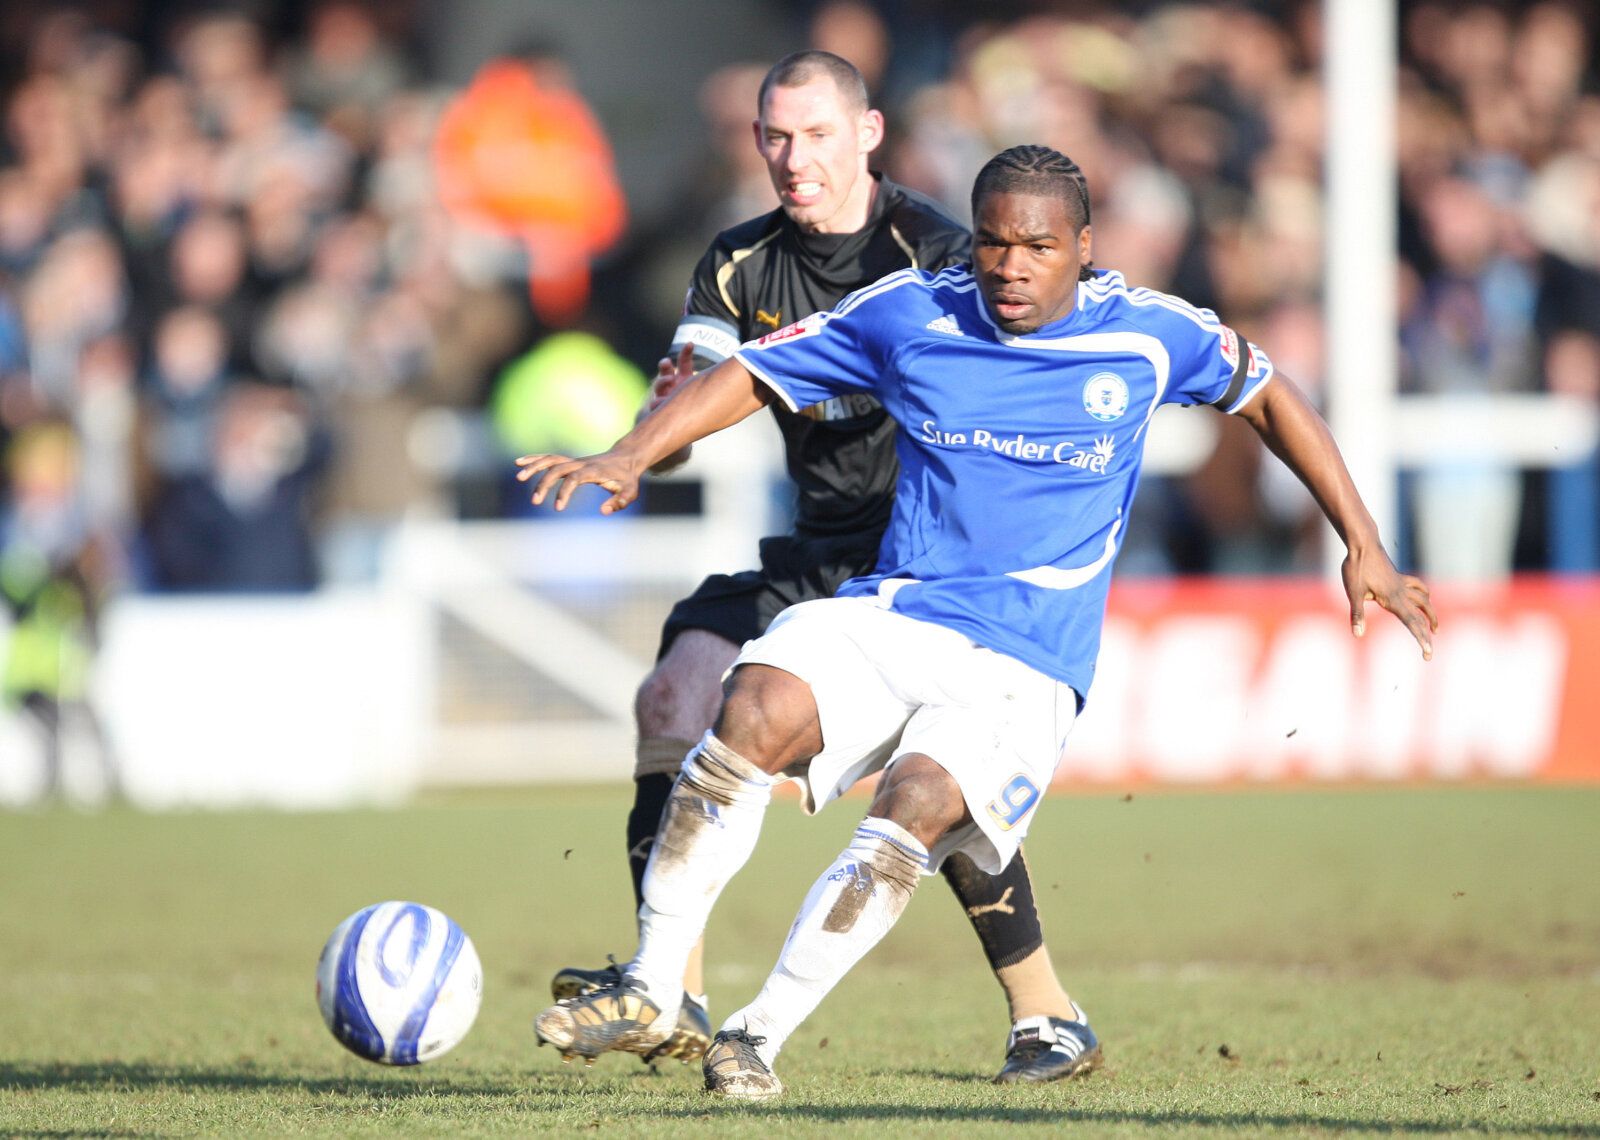 Football - Peterborough United v Coventry City Coca-Cola Football League Championship  - London Road - 09/10 - 6/3/10 
Peterborough's Aaron McLean (R) and Coventry's Stephen Wright in action 
Mandatory Credit: Action Images / Paul Childs 
Livepic